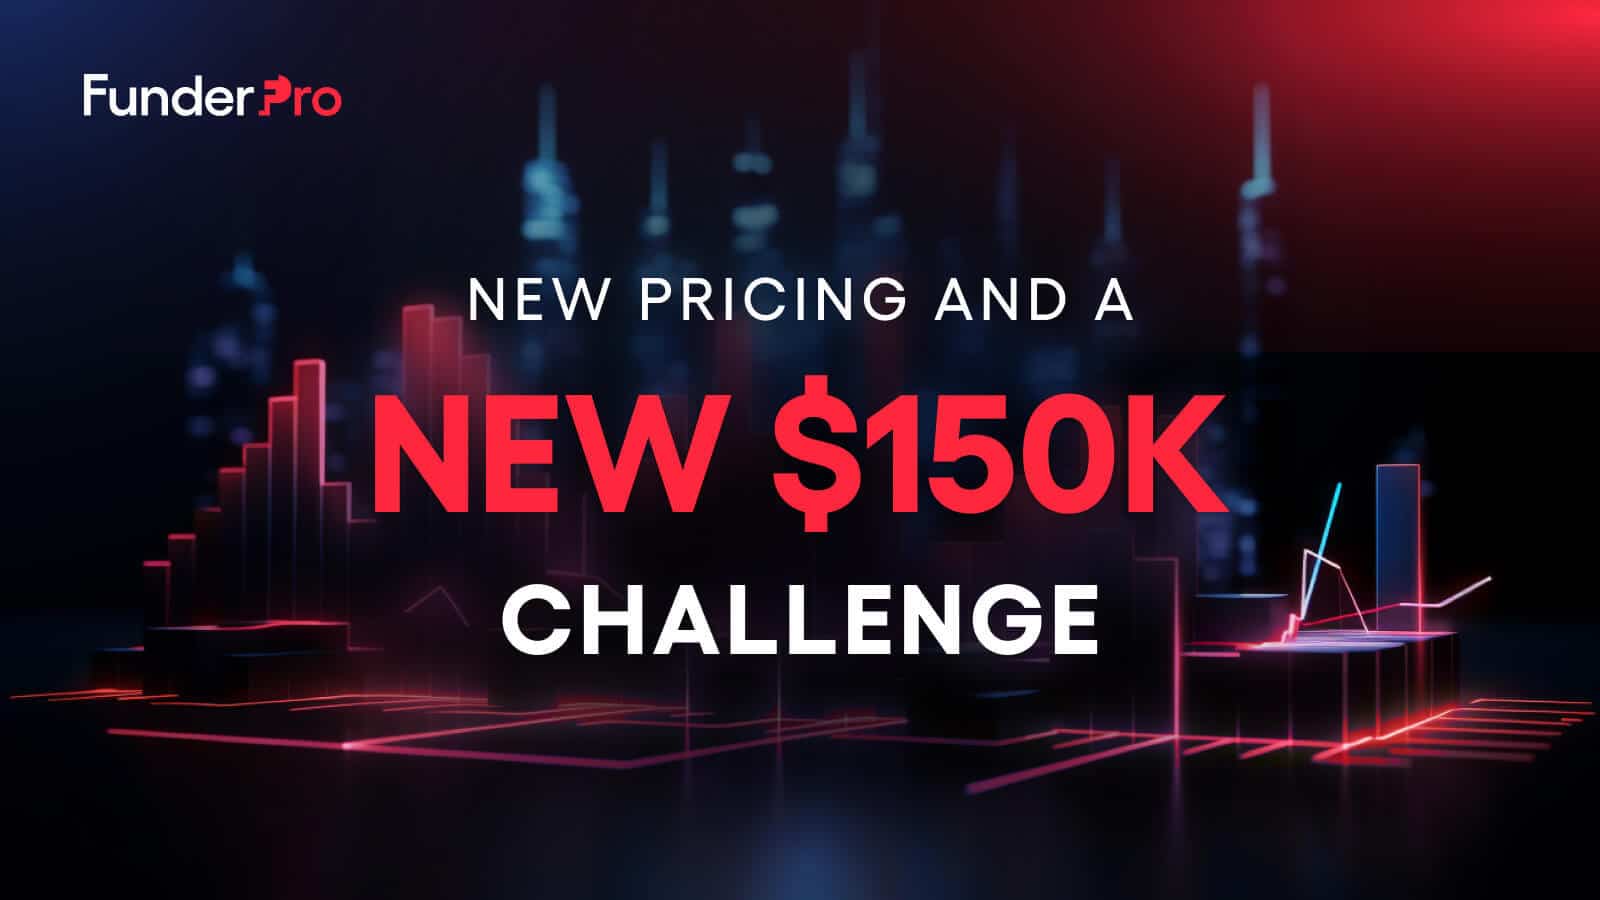 Abstract trading background with sentence "New pricing and a new $150k Challenge"